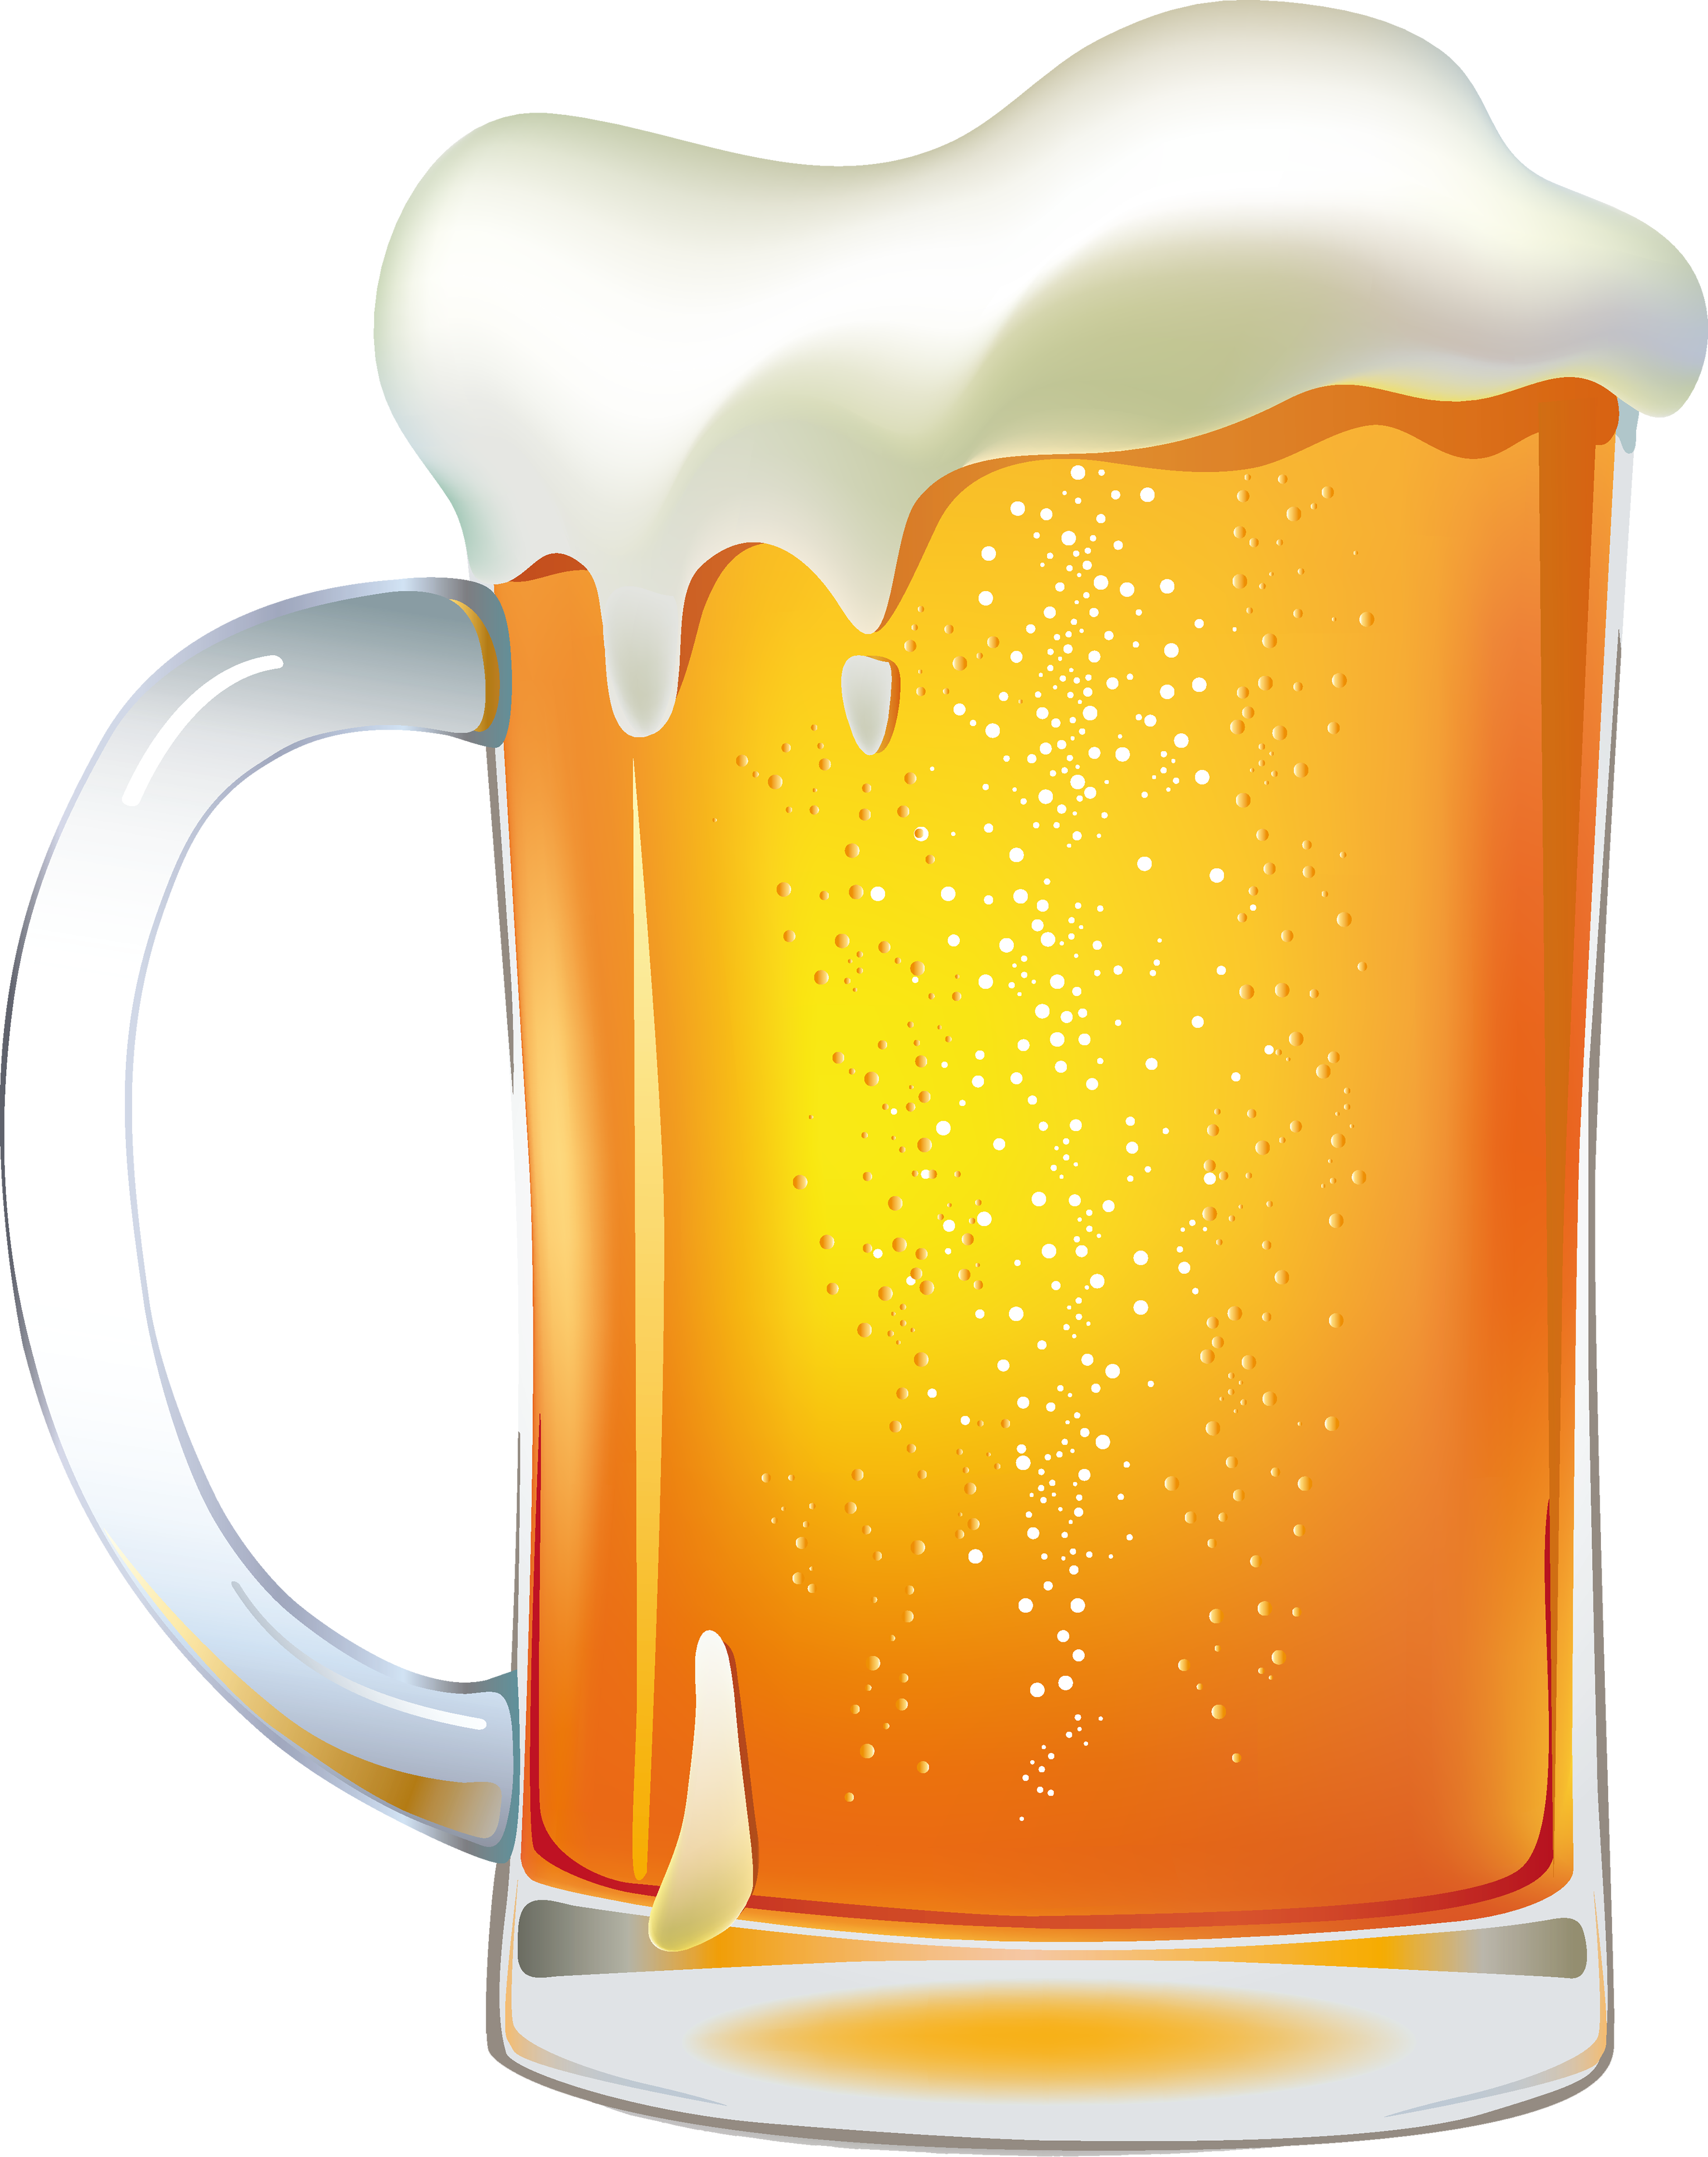 Beer clip art free free clipart images 3 - Clipartix